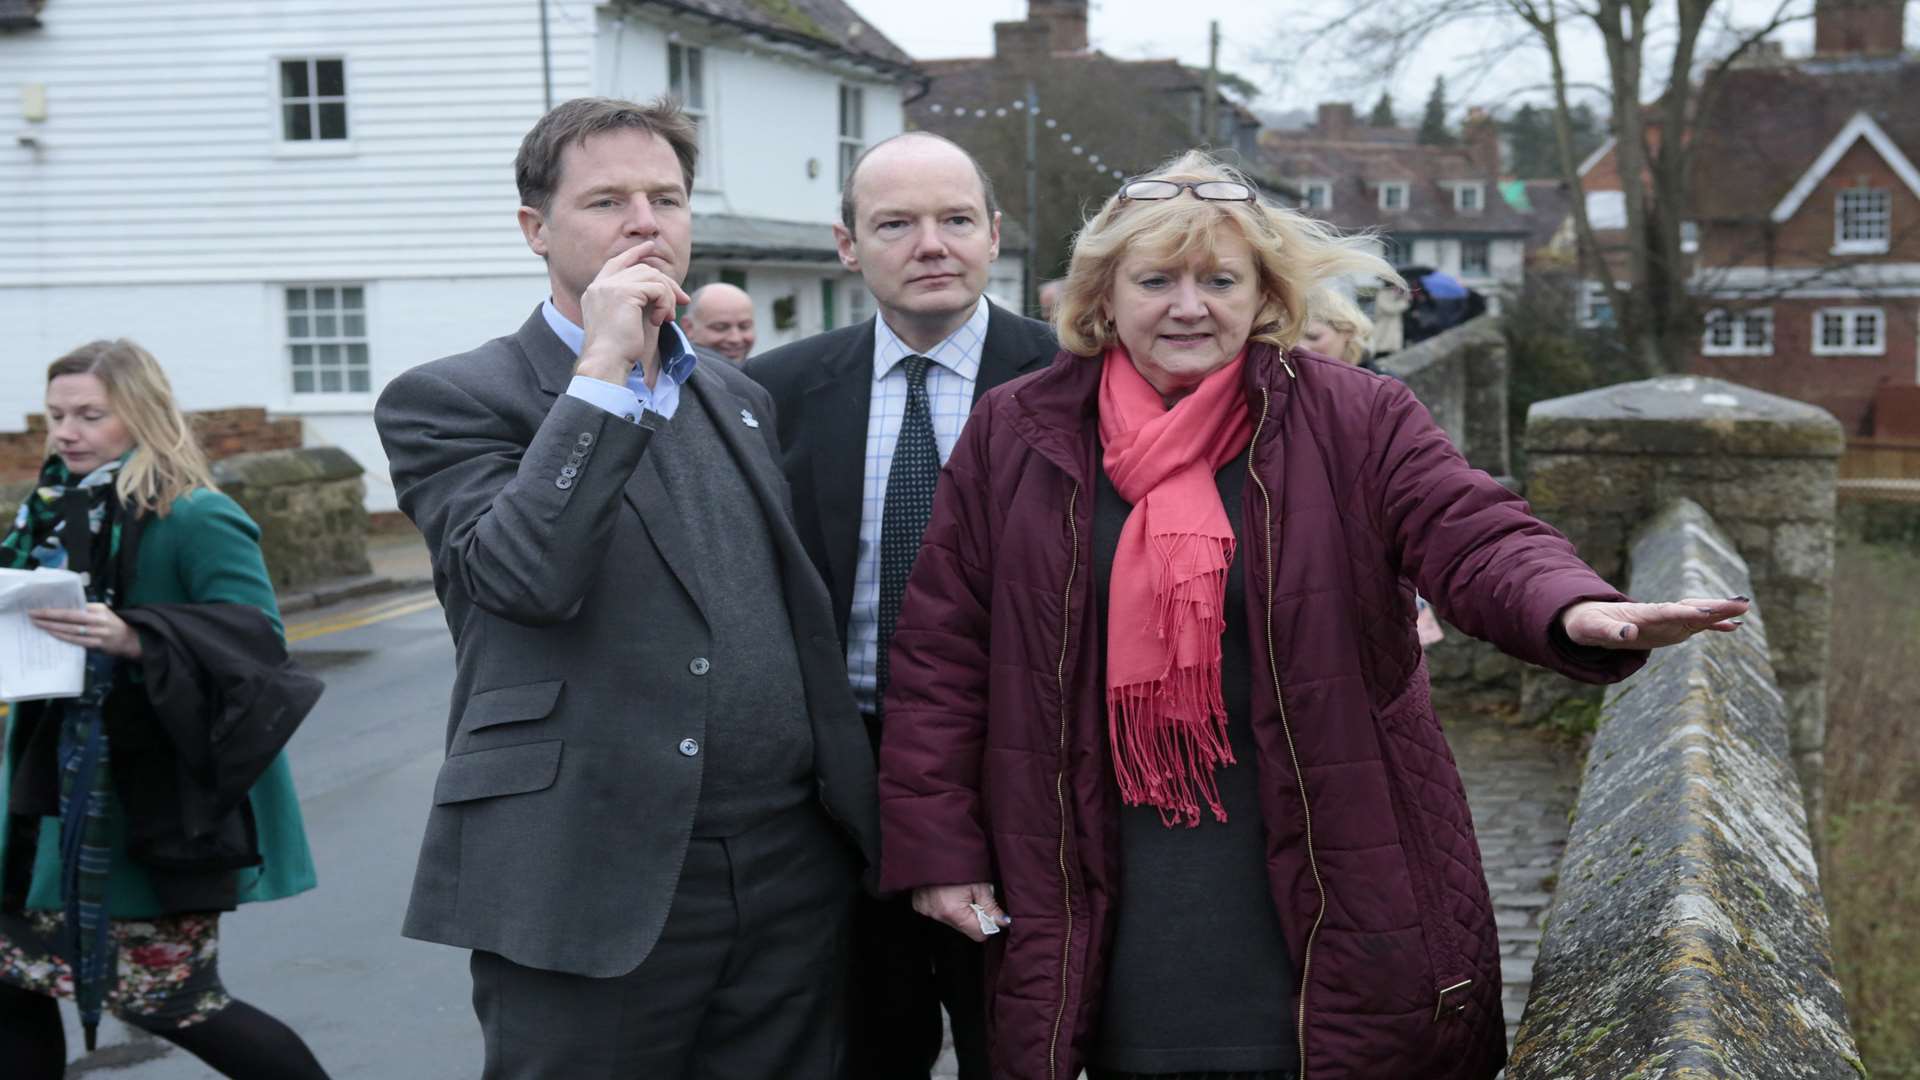 Nick Clegg with Jasper Gerard, Lib Dem Parliamentary candidate for Maidstone and the Weald, and Geraldine Brown, chairman of Yalding Parish Council